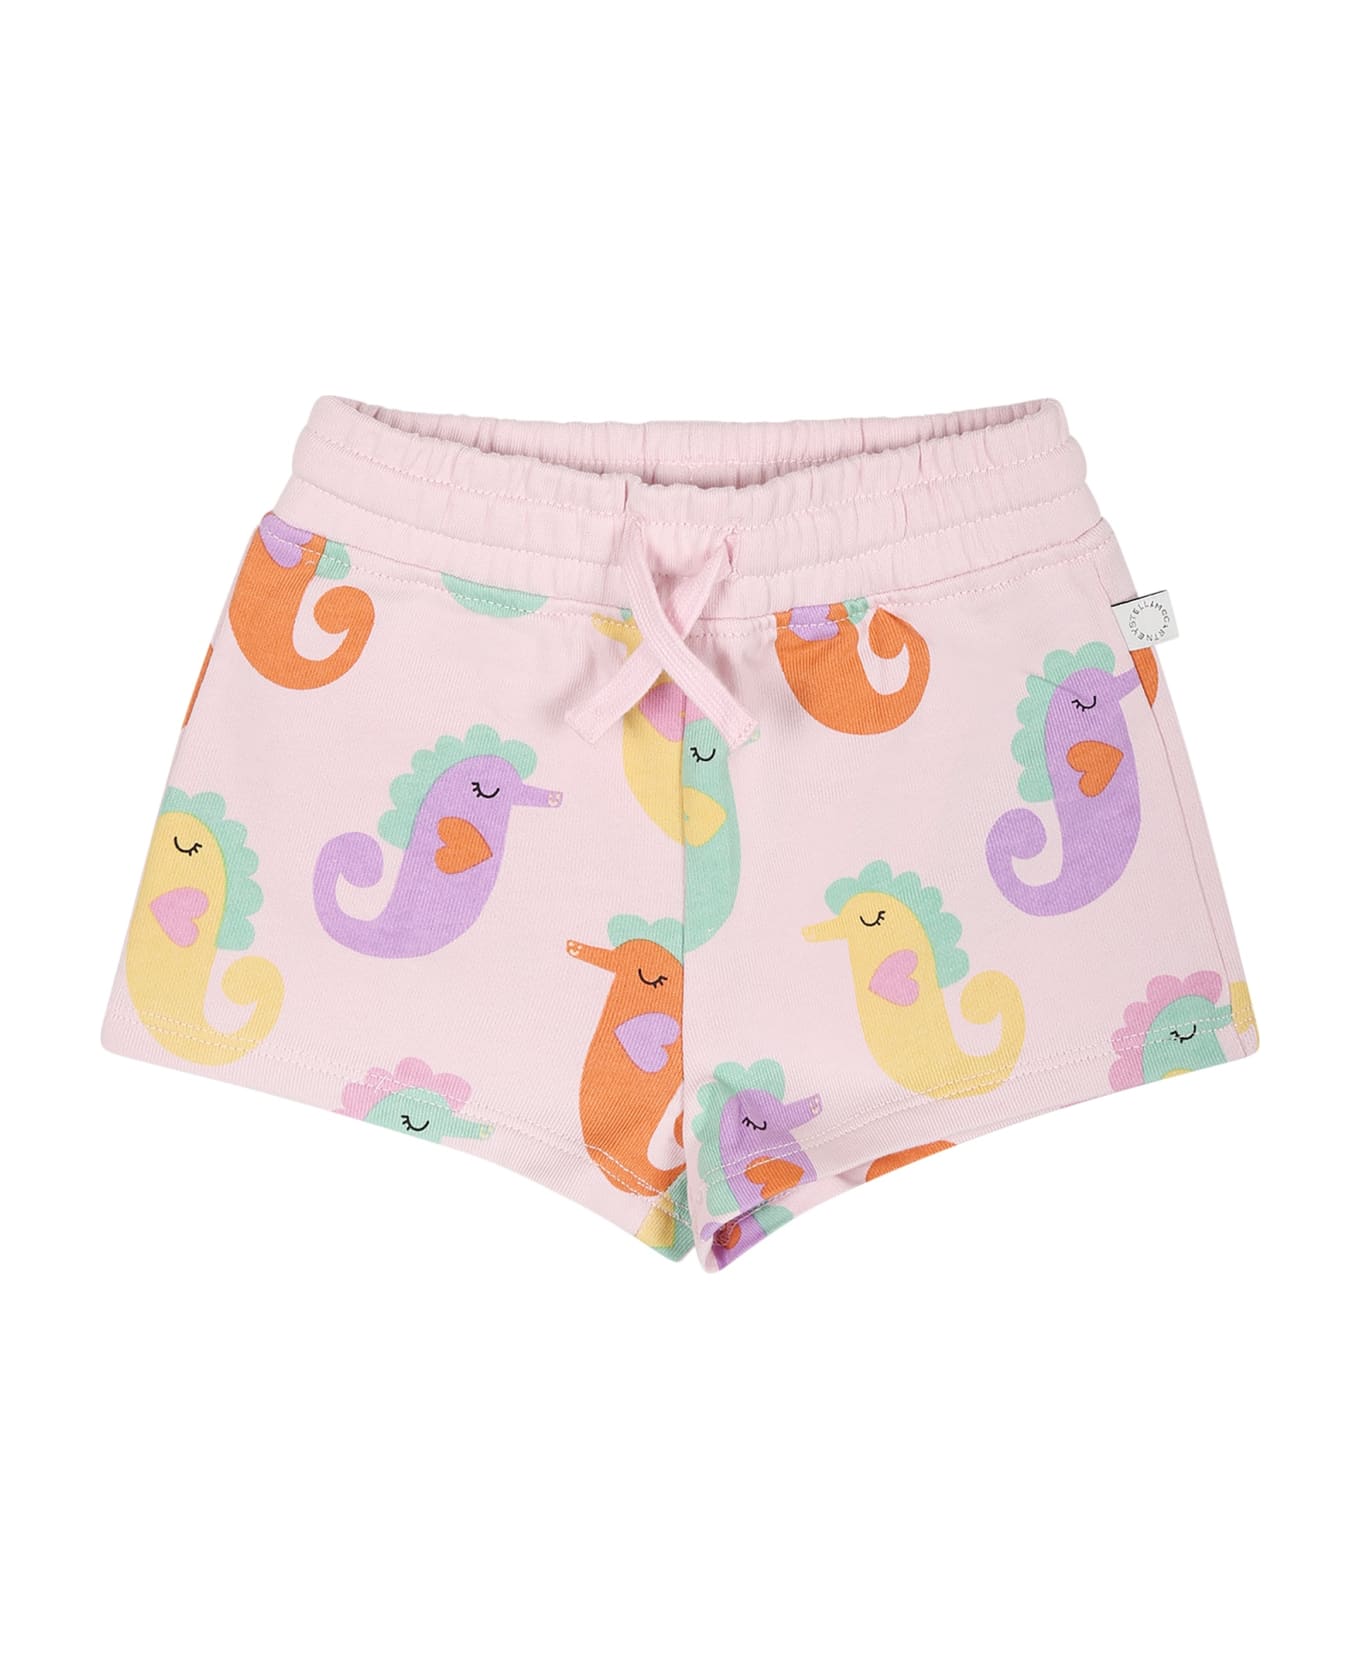 Stella McCartney Kids Pink Shorts For Baby Girl With Seahorse - Violet ボトムス